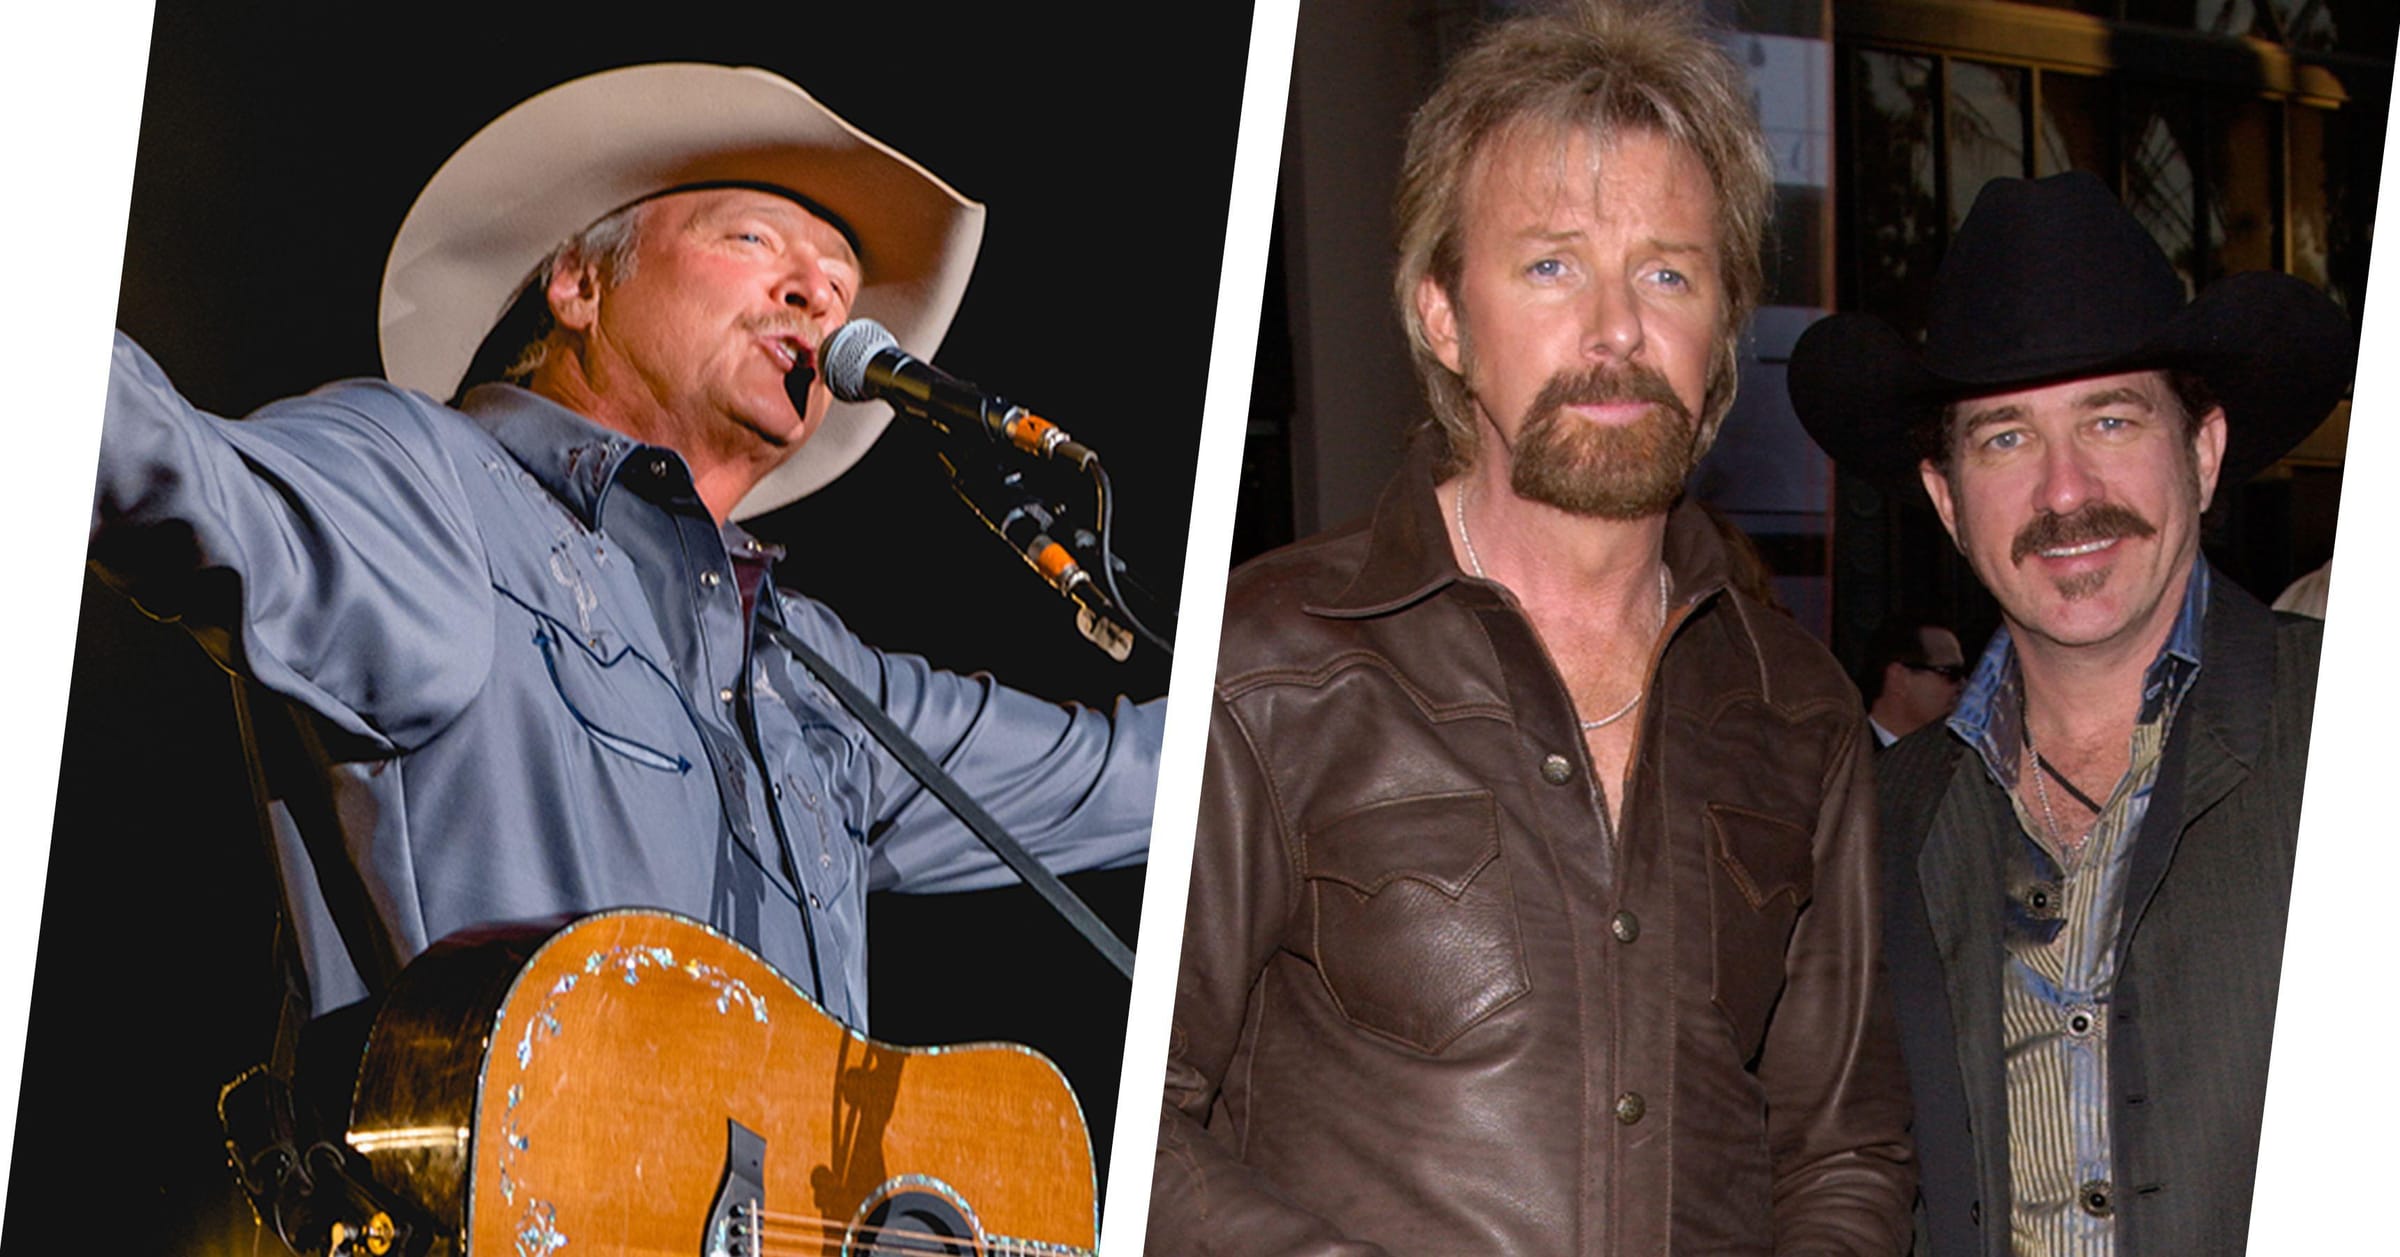 1980s male country singers